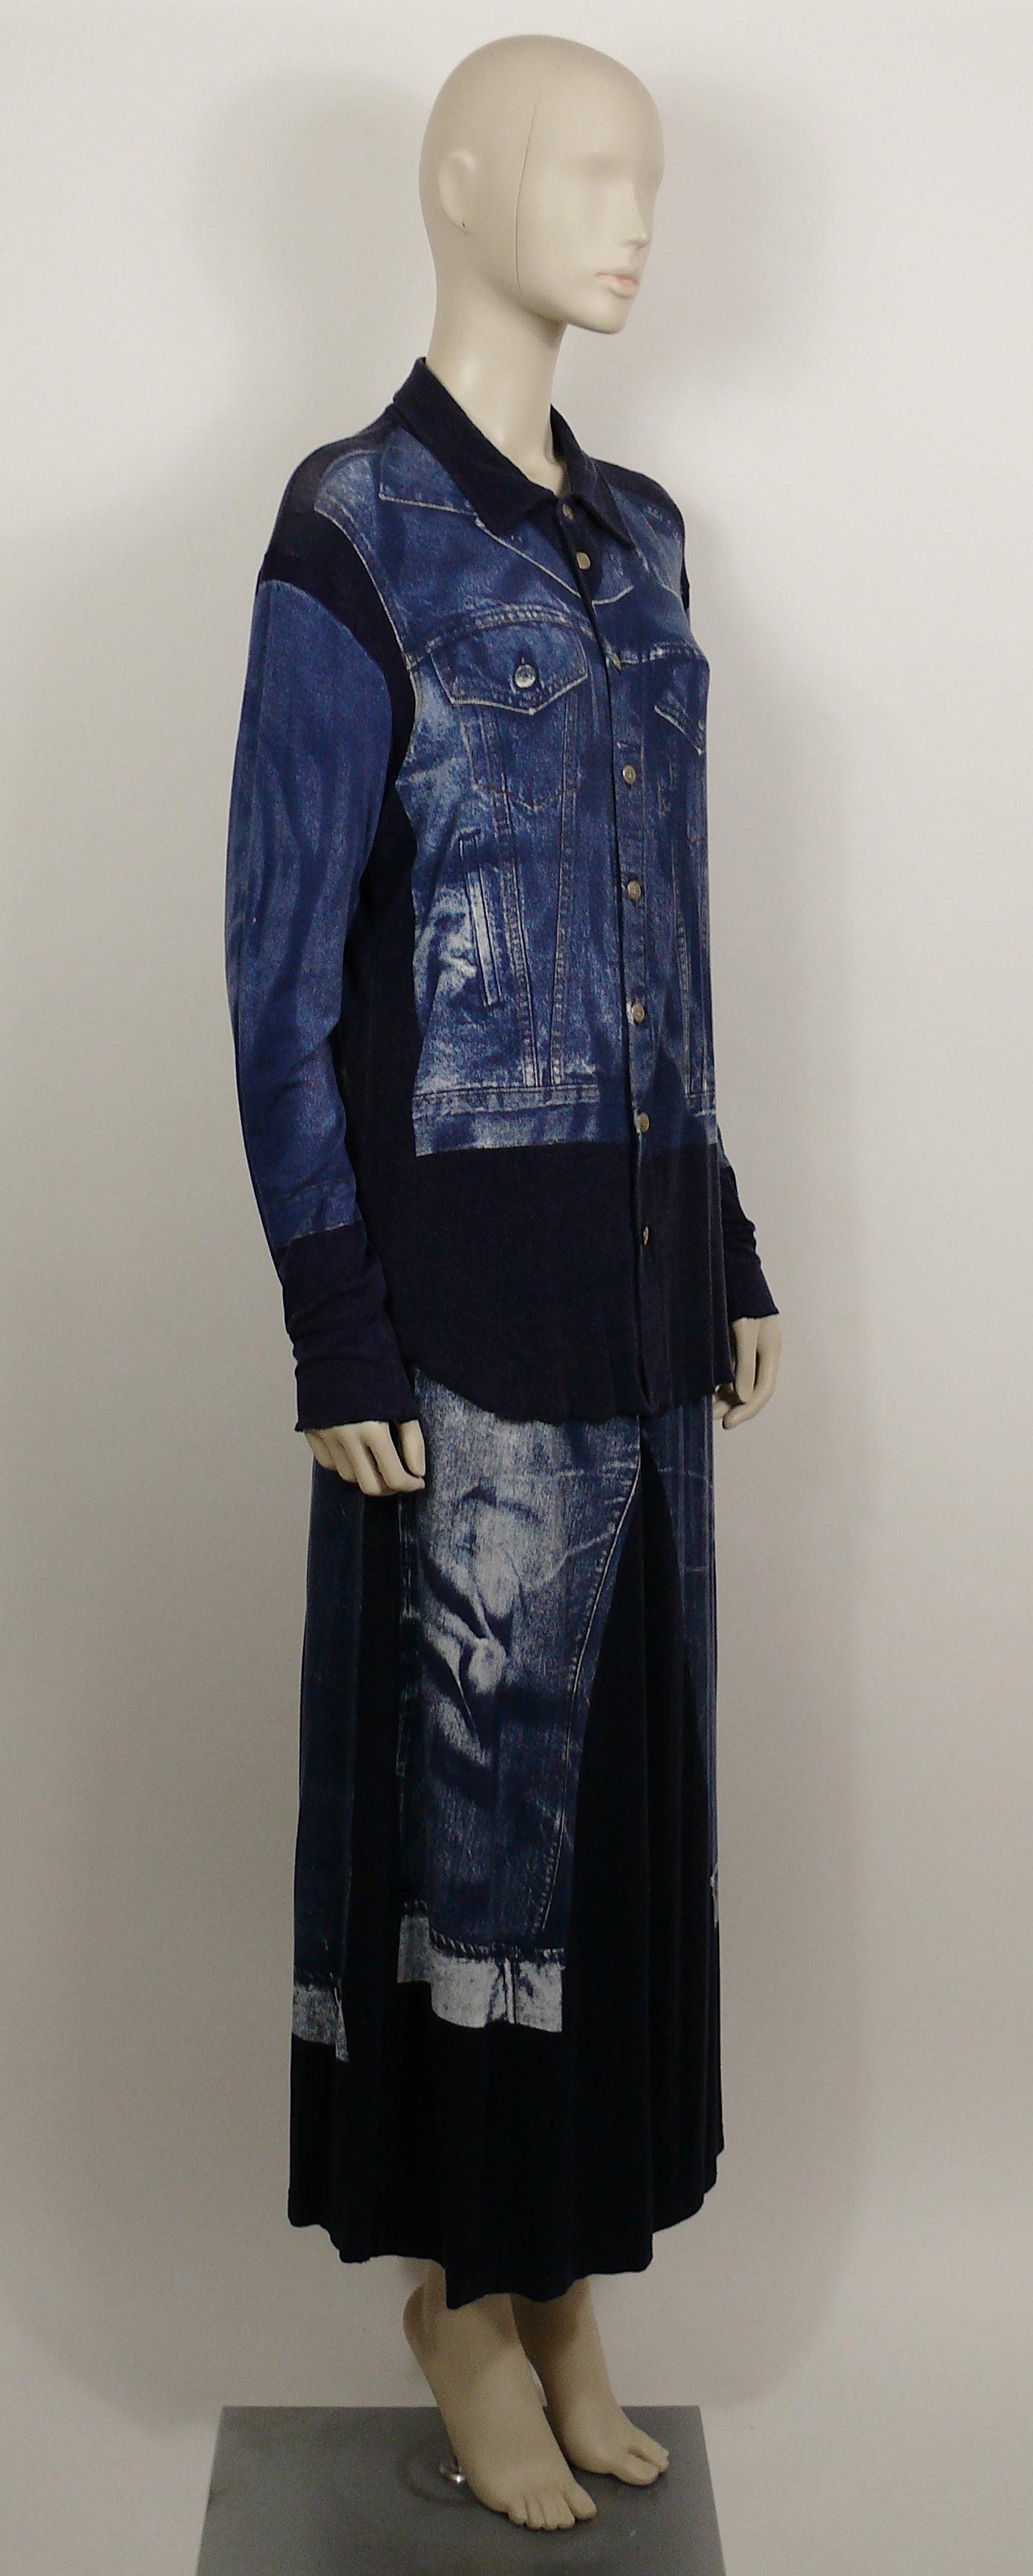 JEAN PAUL GAULTIER vintage skirt and shirt ensemble featuring an x-ray screen trompe l’œil denim on front and back.

The SHIRT features :
- Navy blue jersey background featuring distressed blue/white x-ray screen trompe l’œil denim jacket print.
-